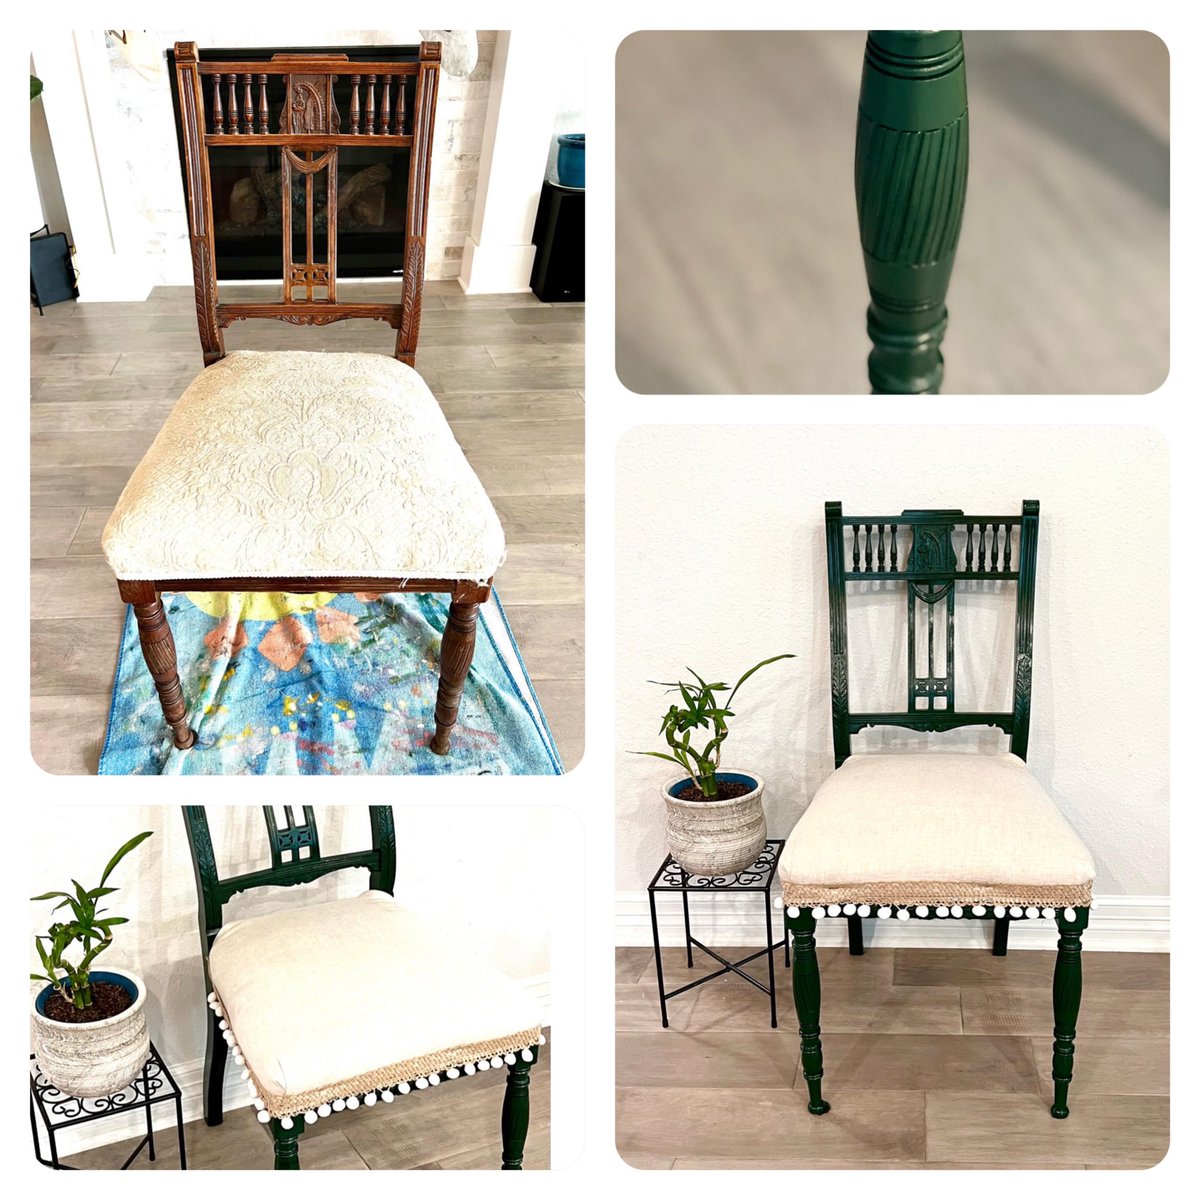 Beautiful Hunter Green Victorian Gothic chair makeover #greendesign #upcycled #recycled #houstondesign #houstonartist 💚